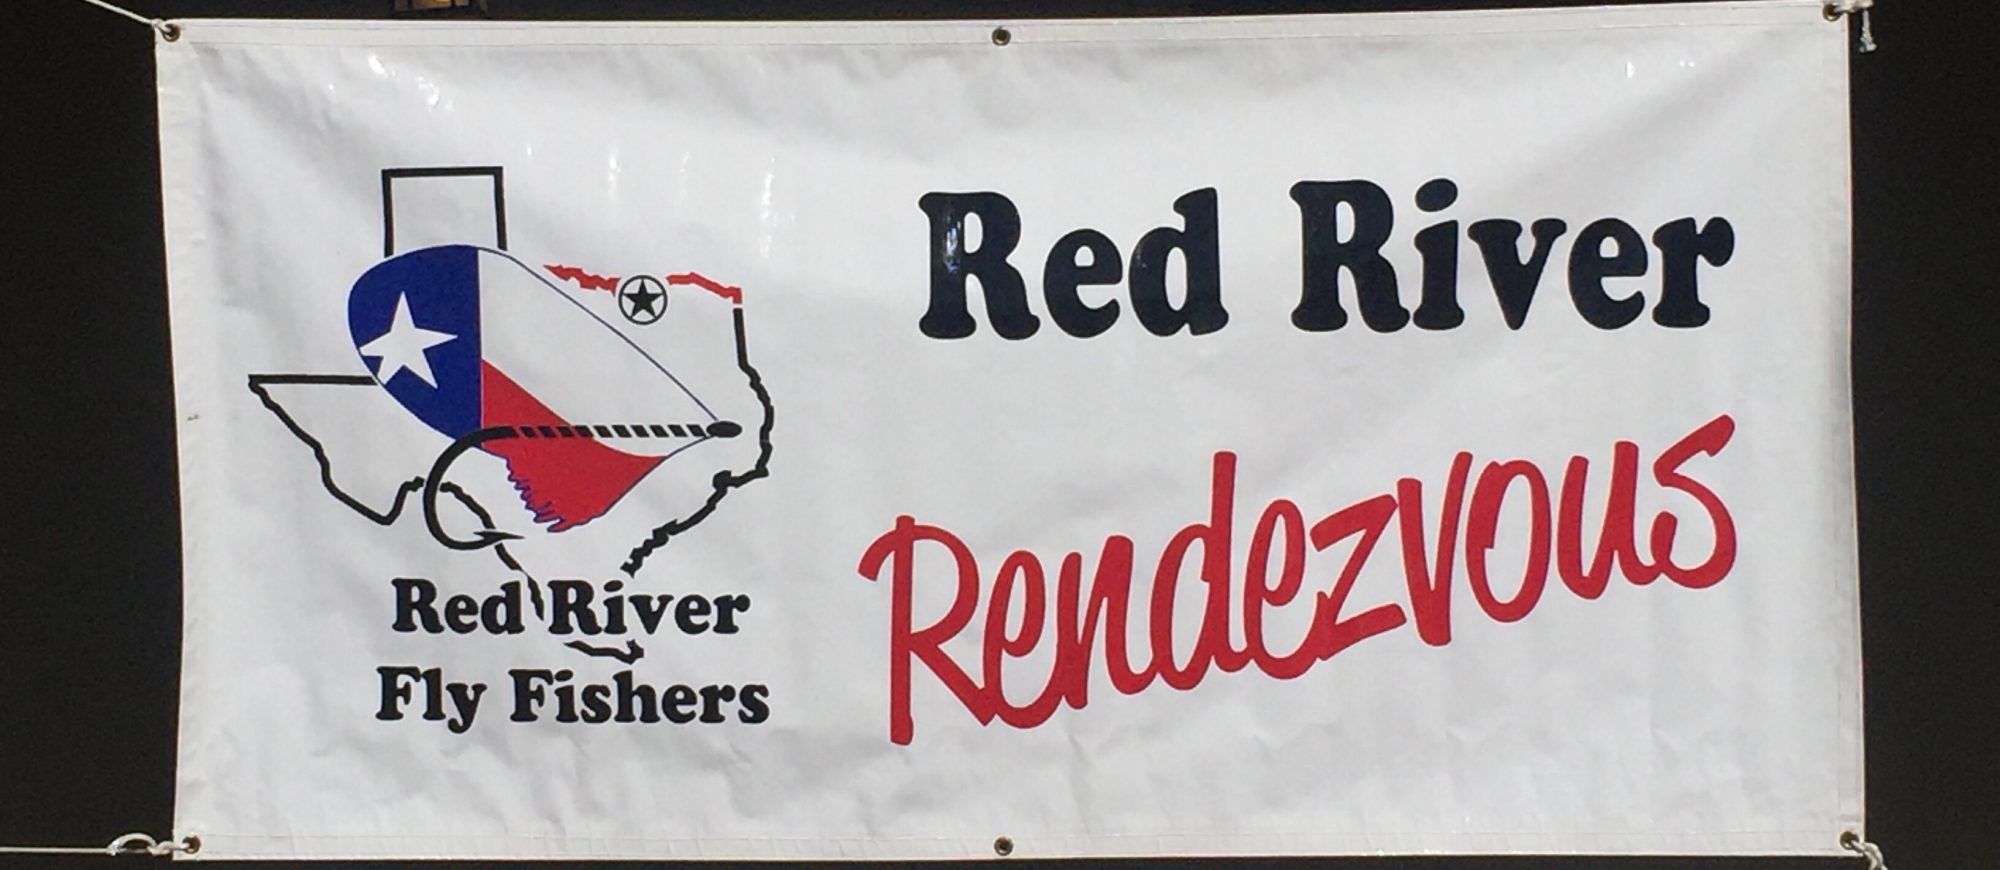 Red River Fly Fishers